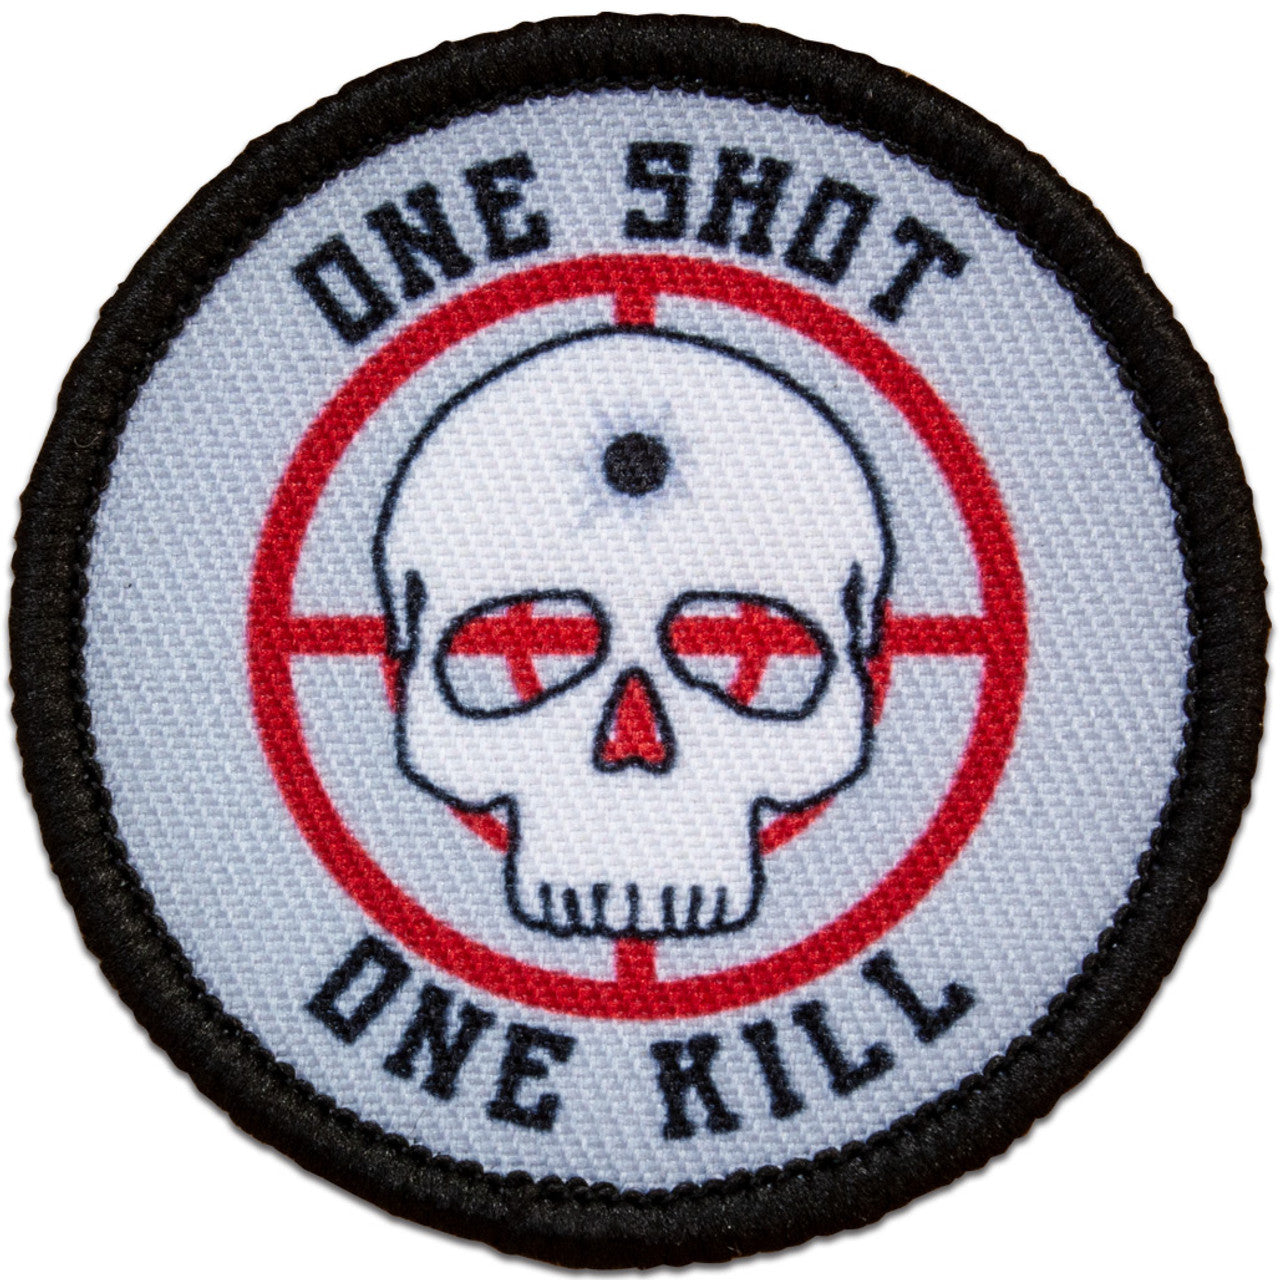 "ONE SHOT, ONE KILL" MORALE PATCH